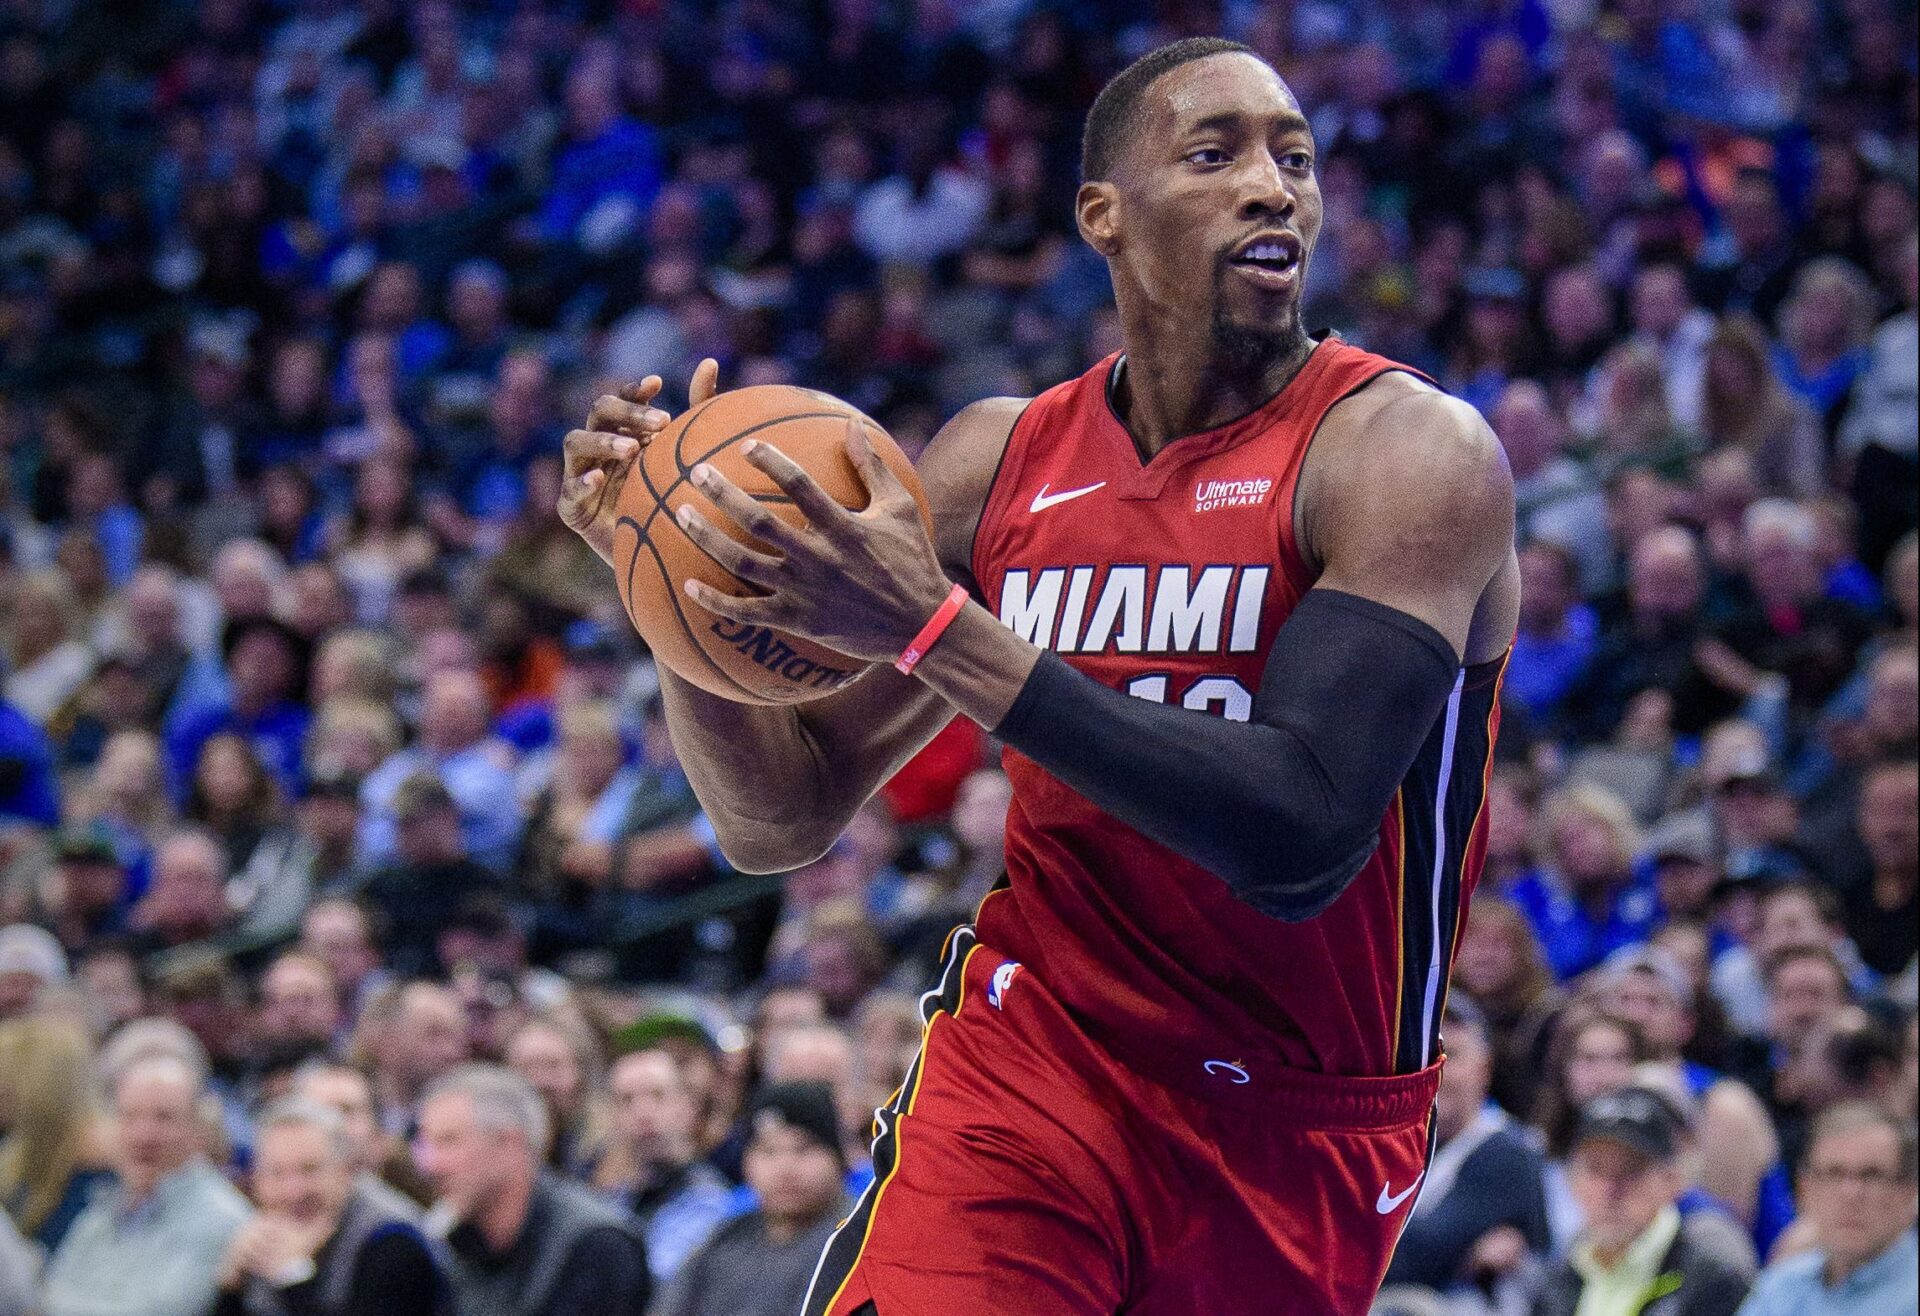 Bam Adebayo: The Rise of a Versatile Force in the NBA